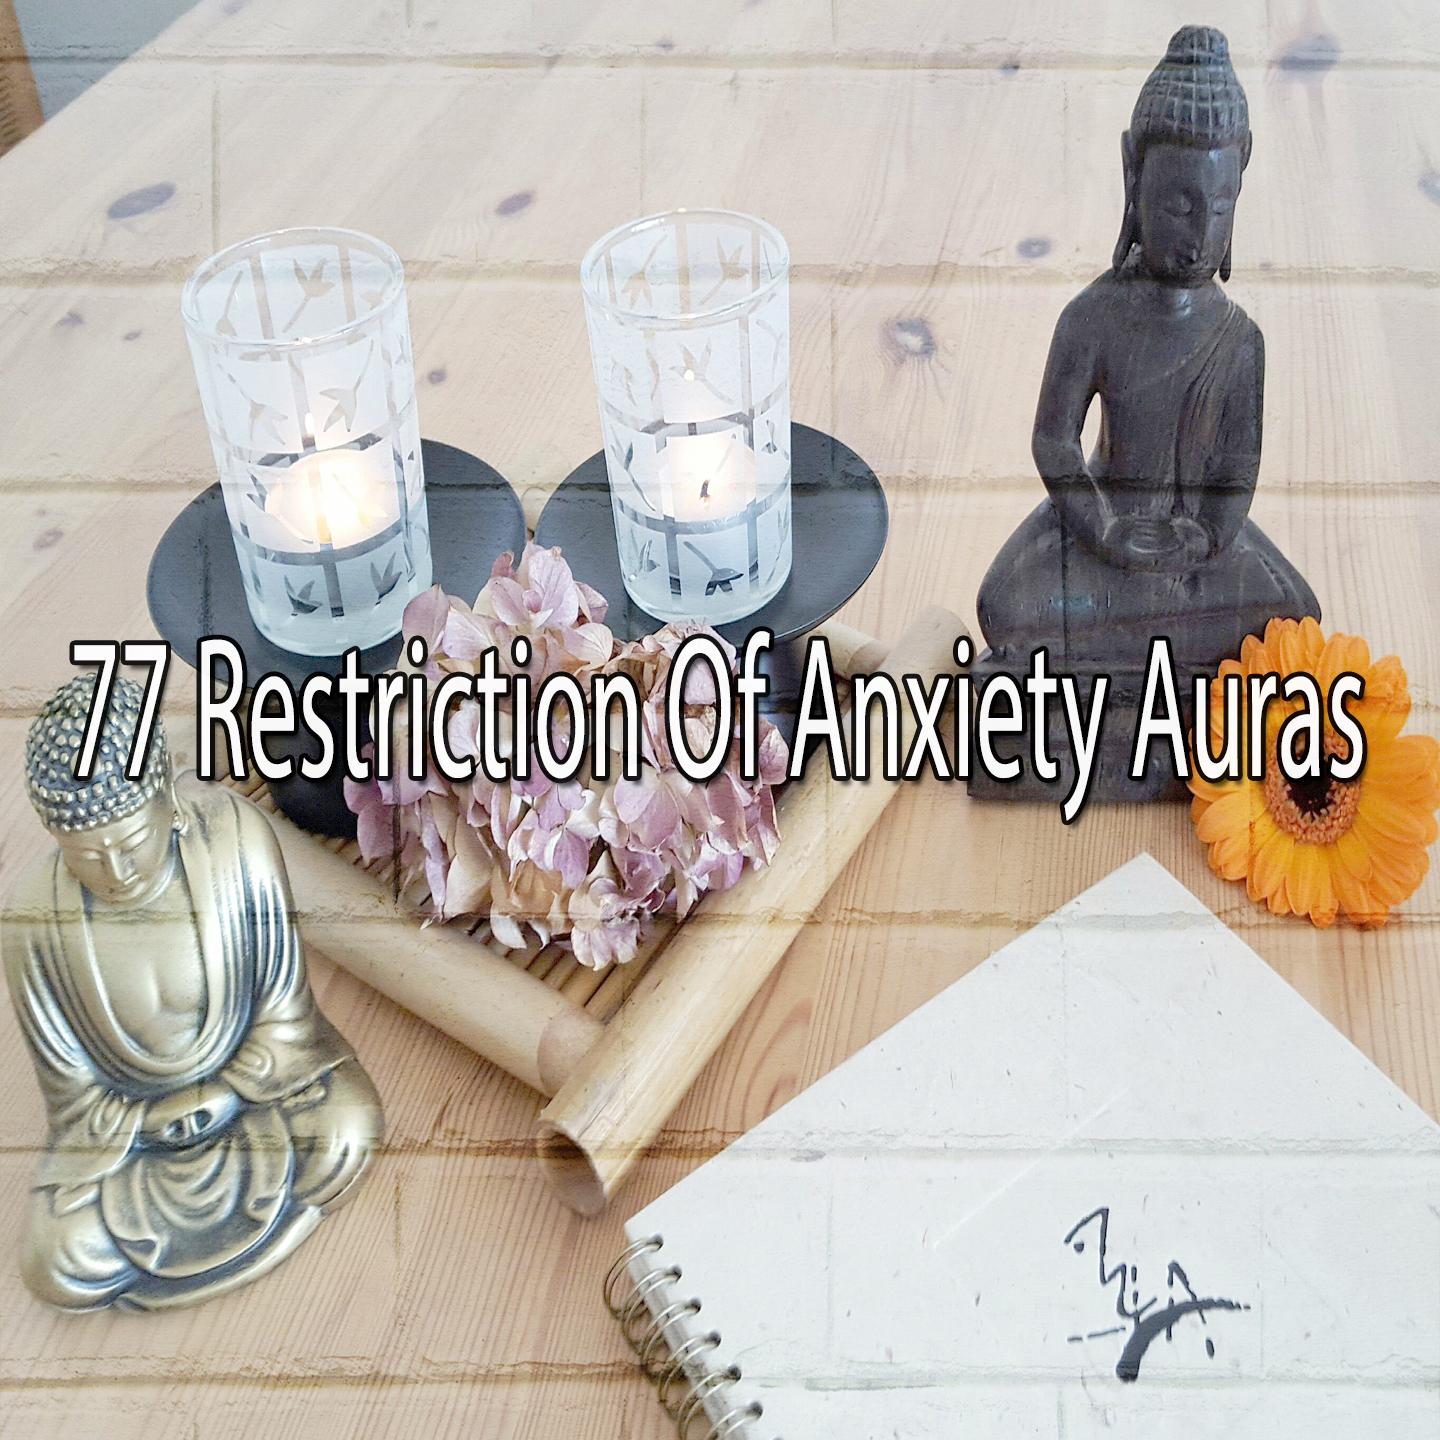 77 Restriction of Anxiety Auras